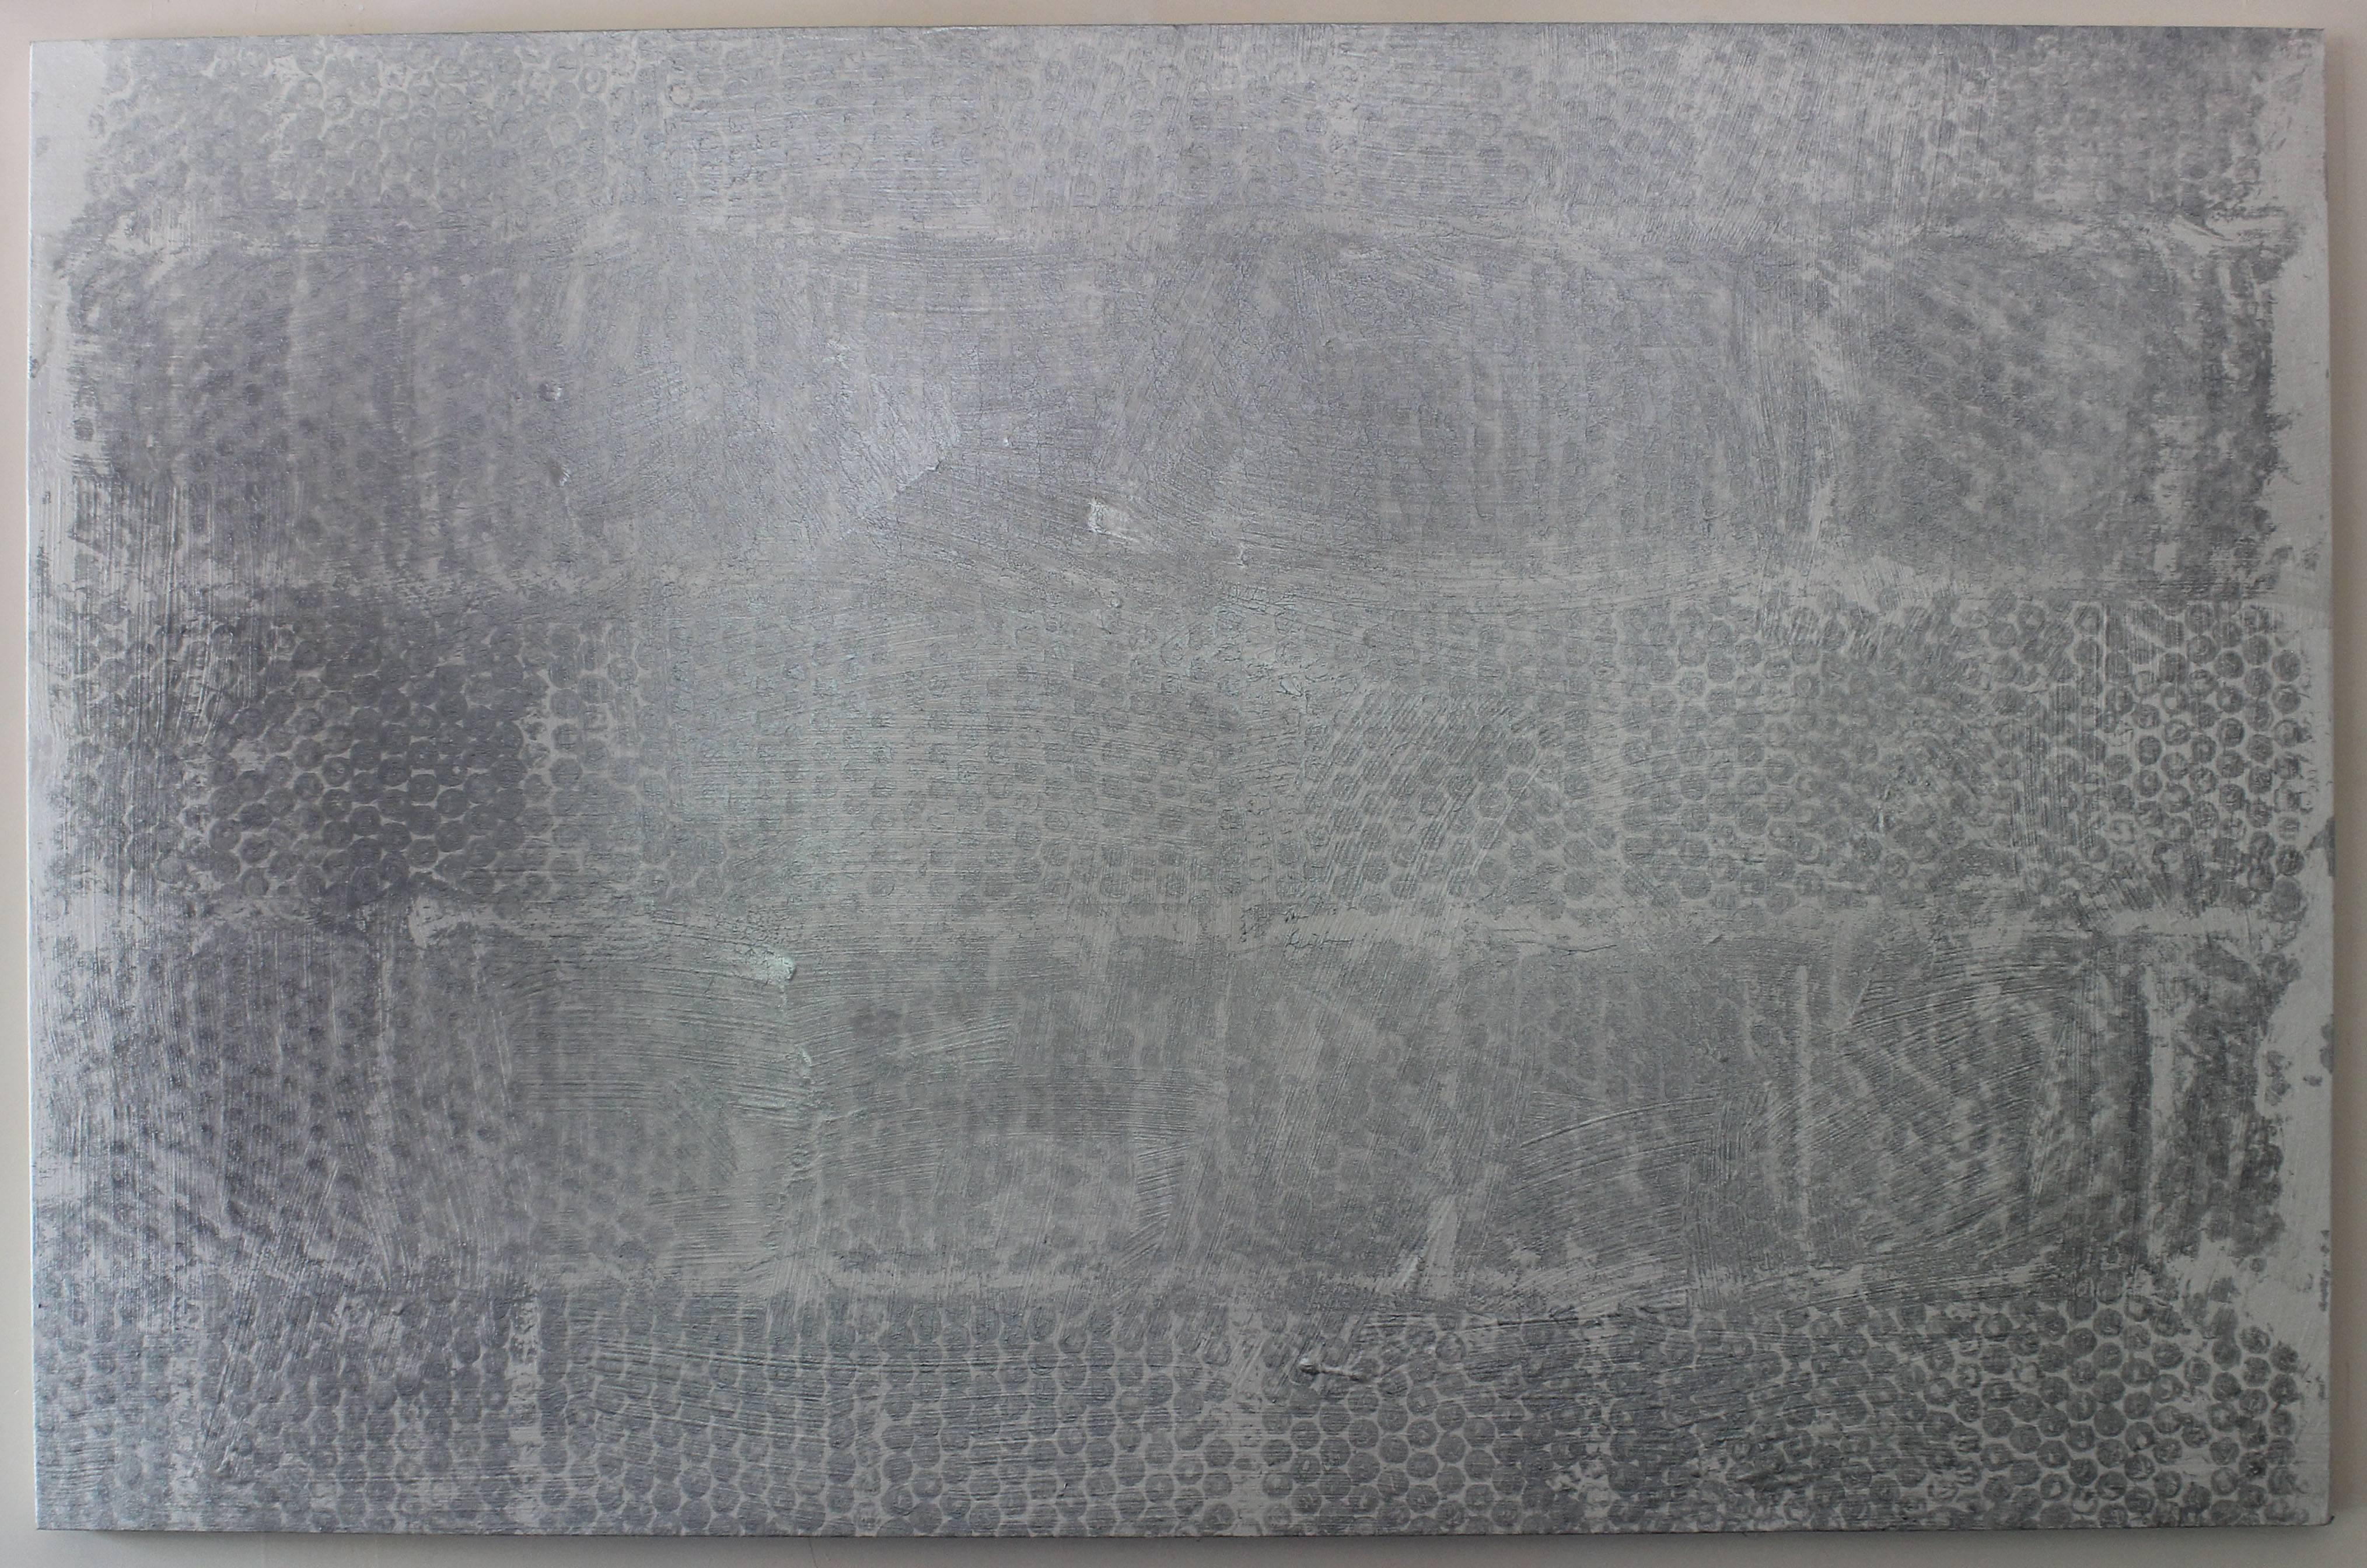 Channelling Agnes Martin intersepted by Jasper Johns, in irredescent and metallic paint on canvas; 2016.